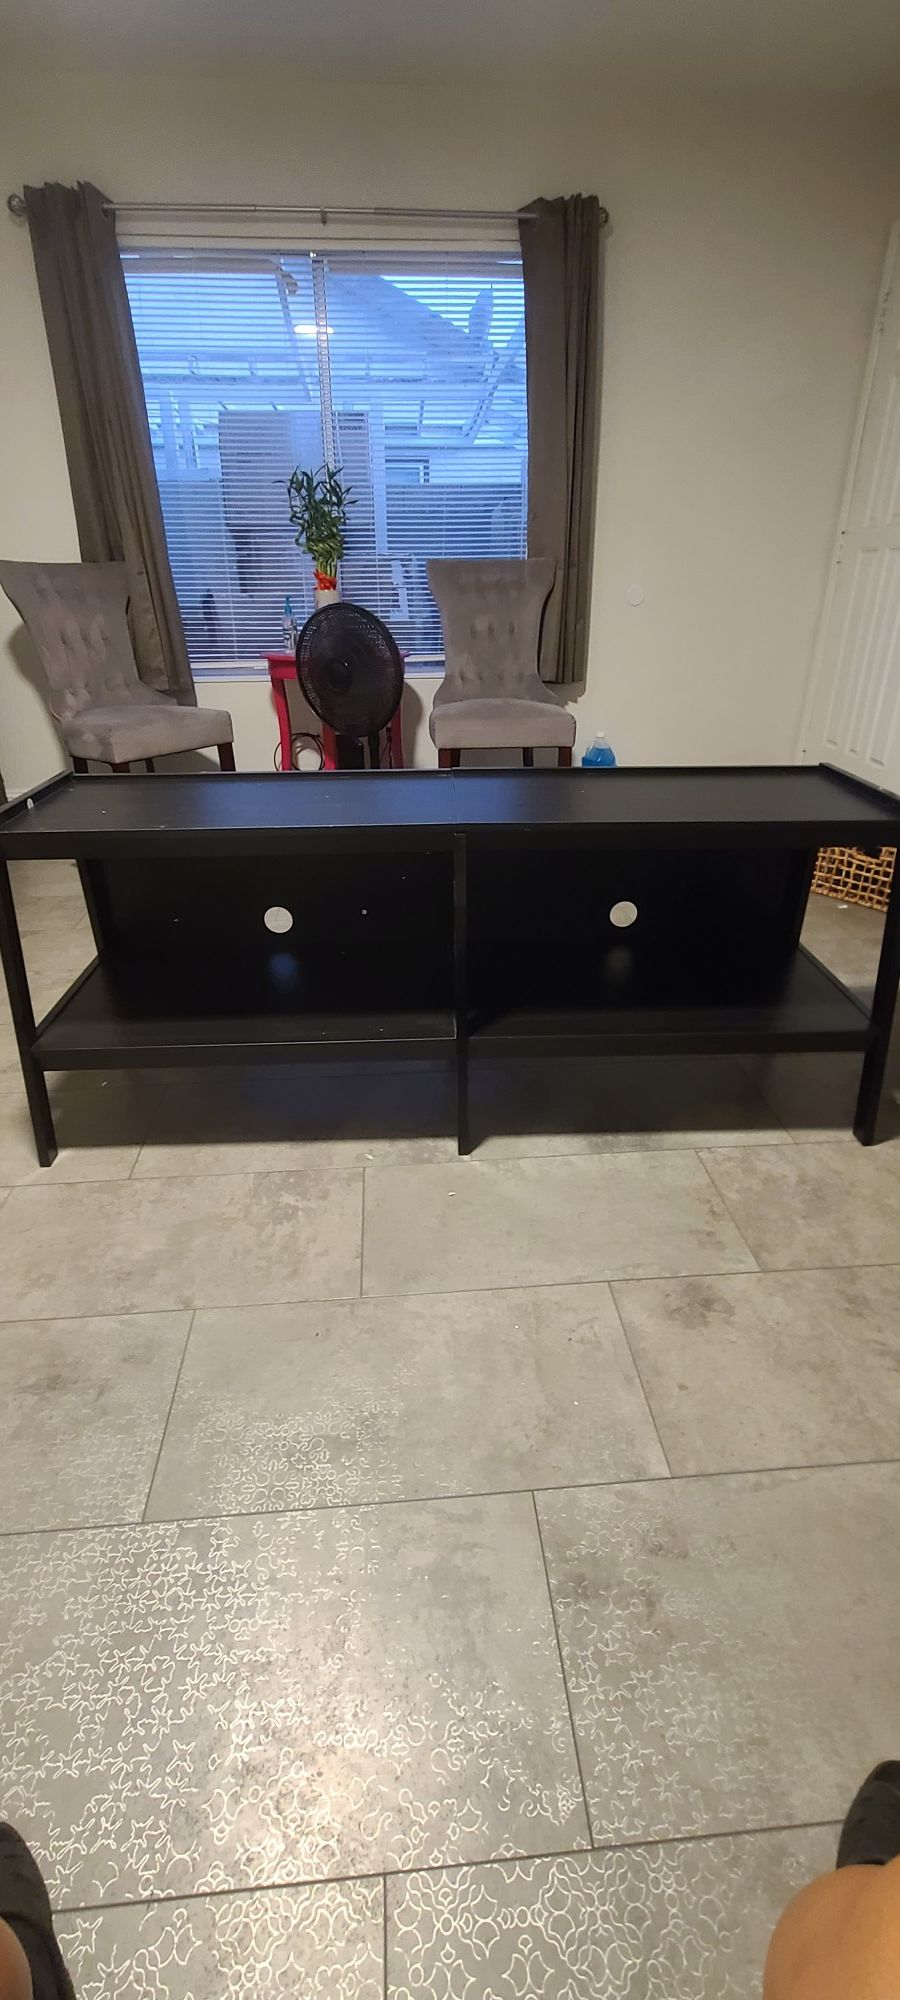 Newly Assembled TV stand fits up to 65" TV